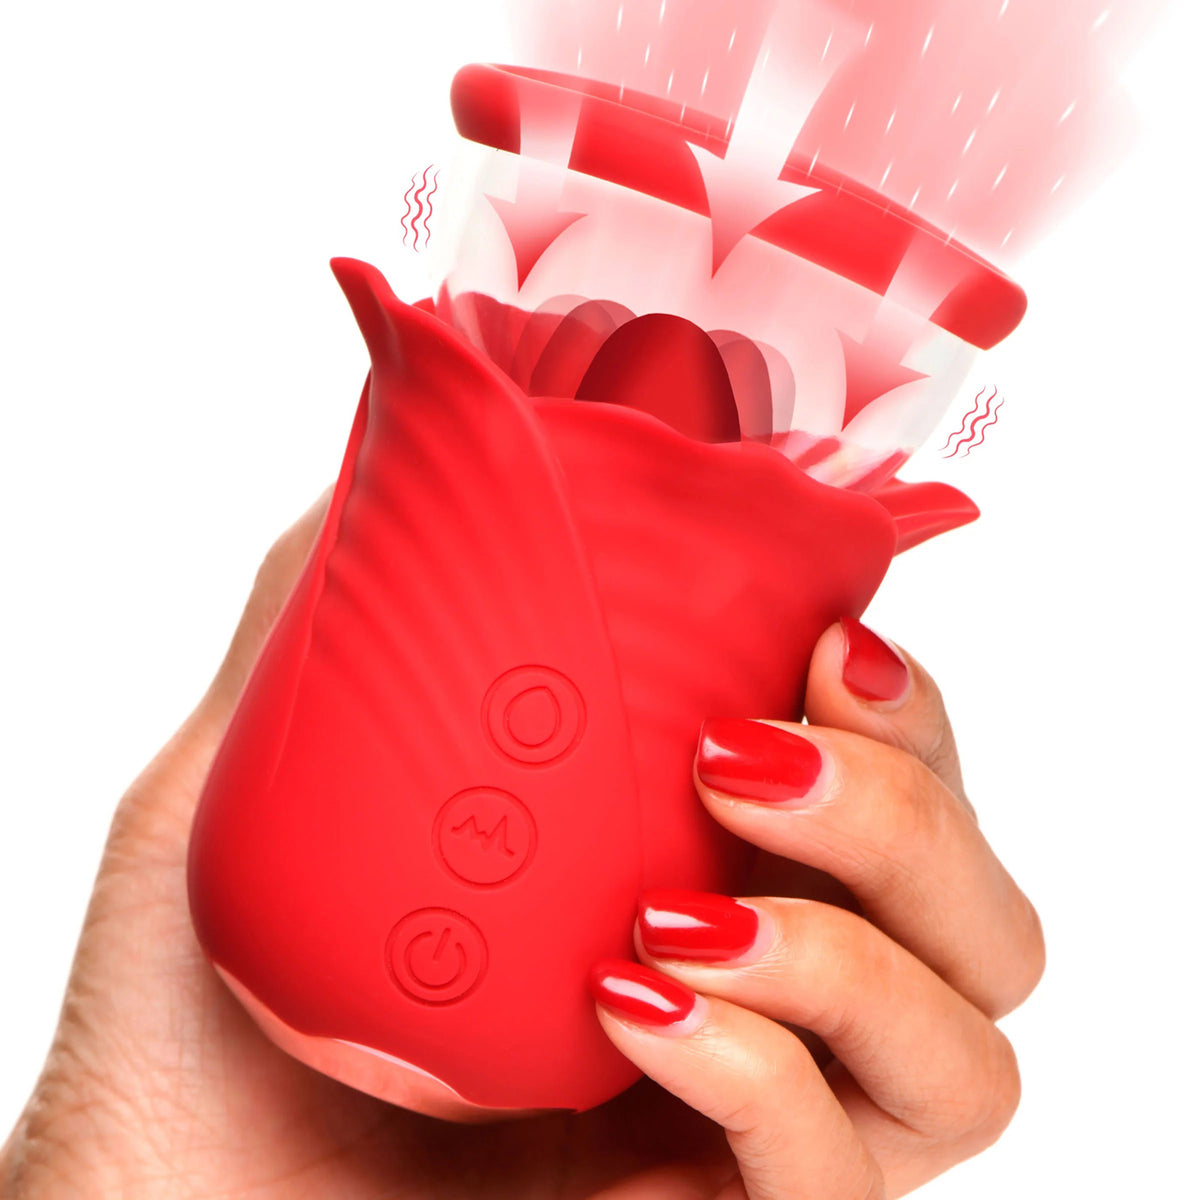 Lily Lover Sucking and Vibrating Clitoral  Stimulator- Red